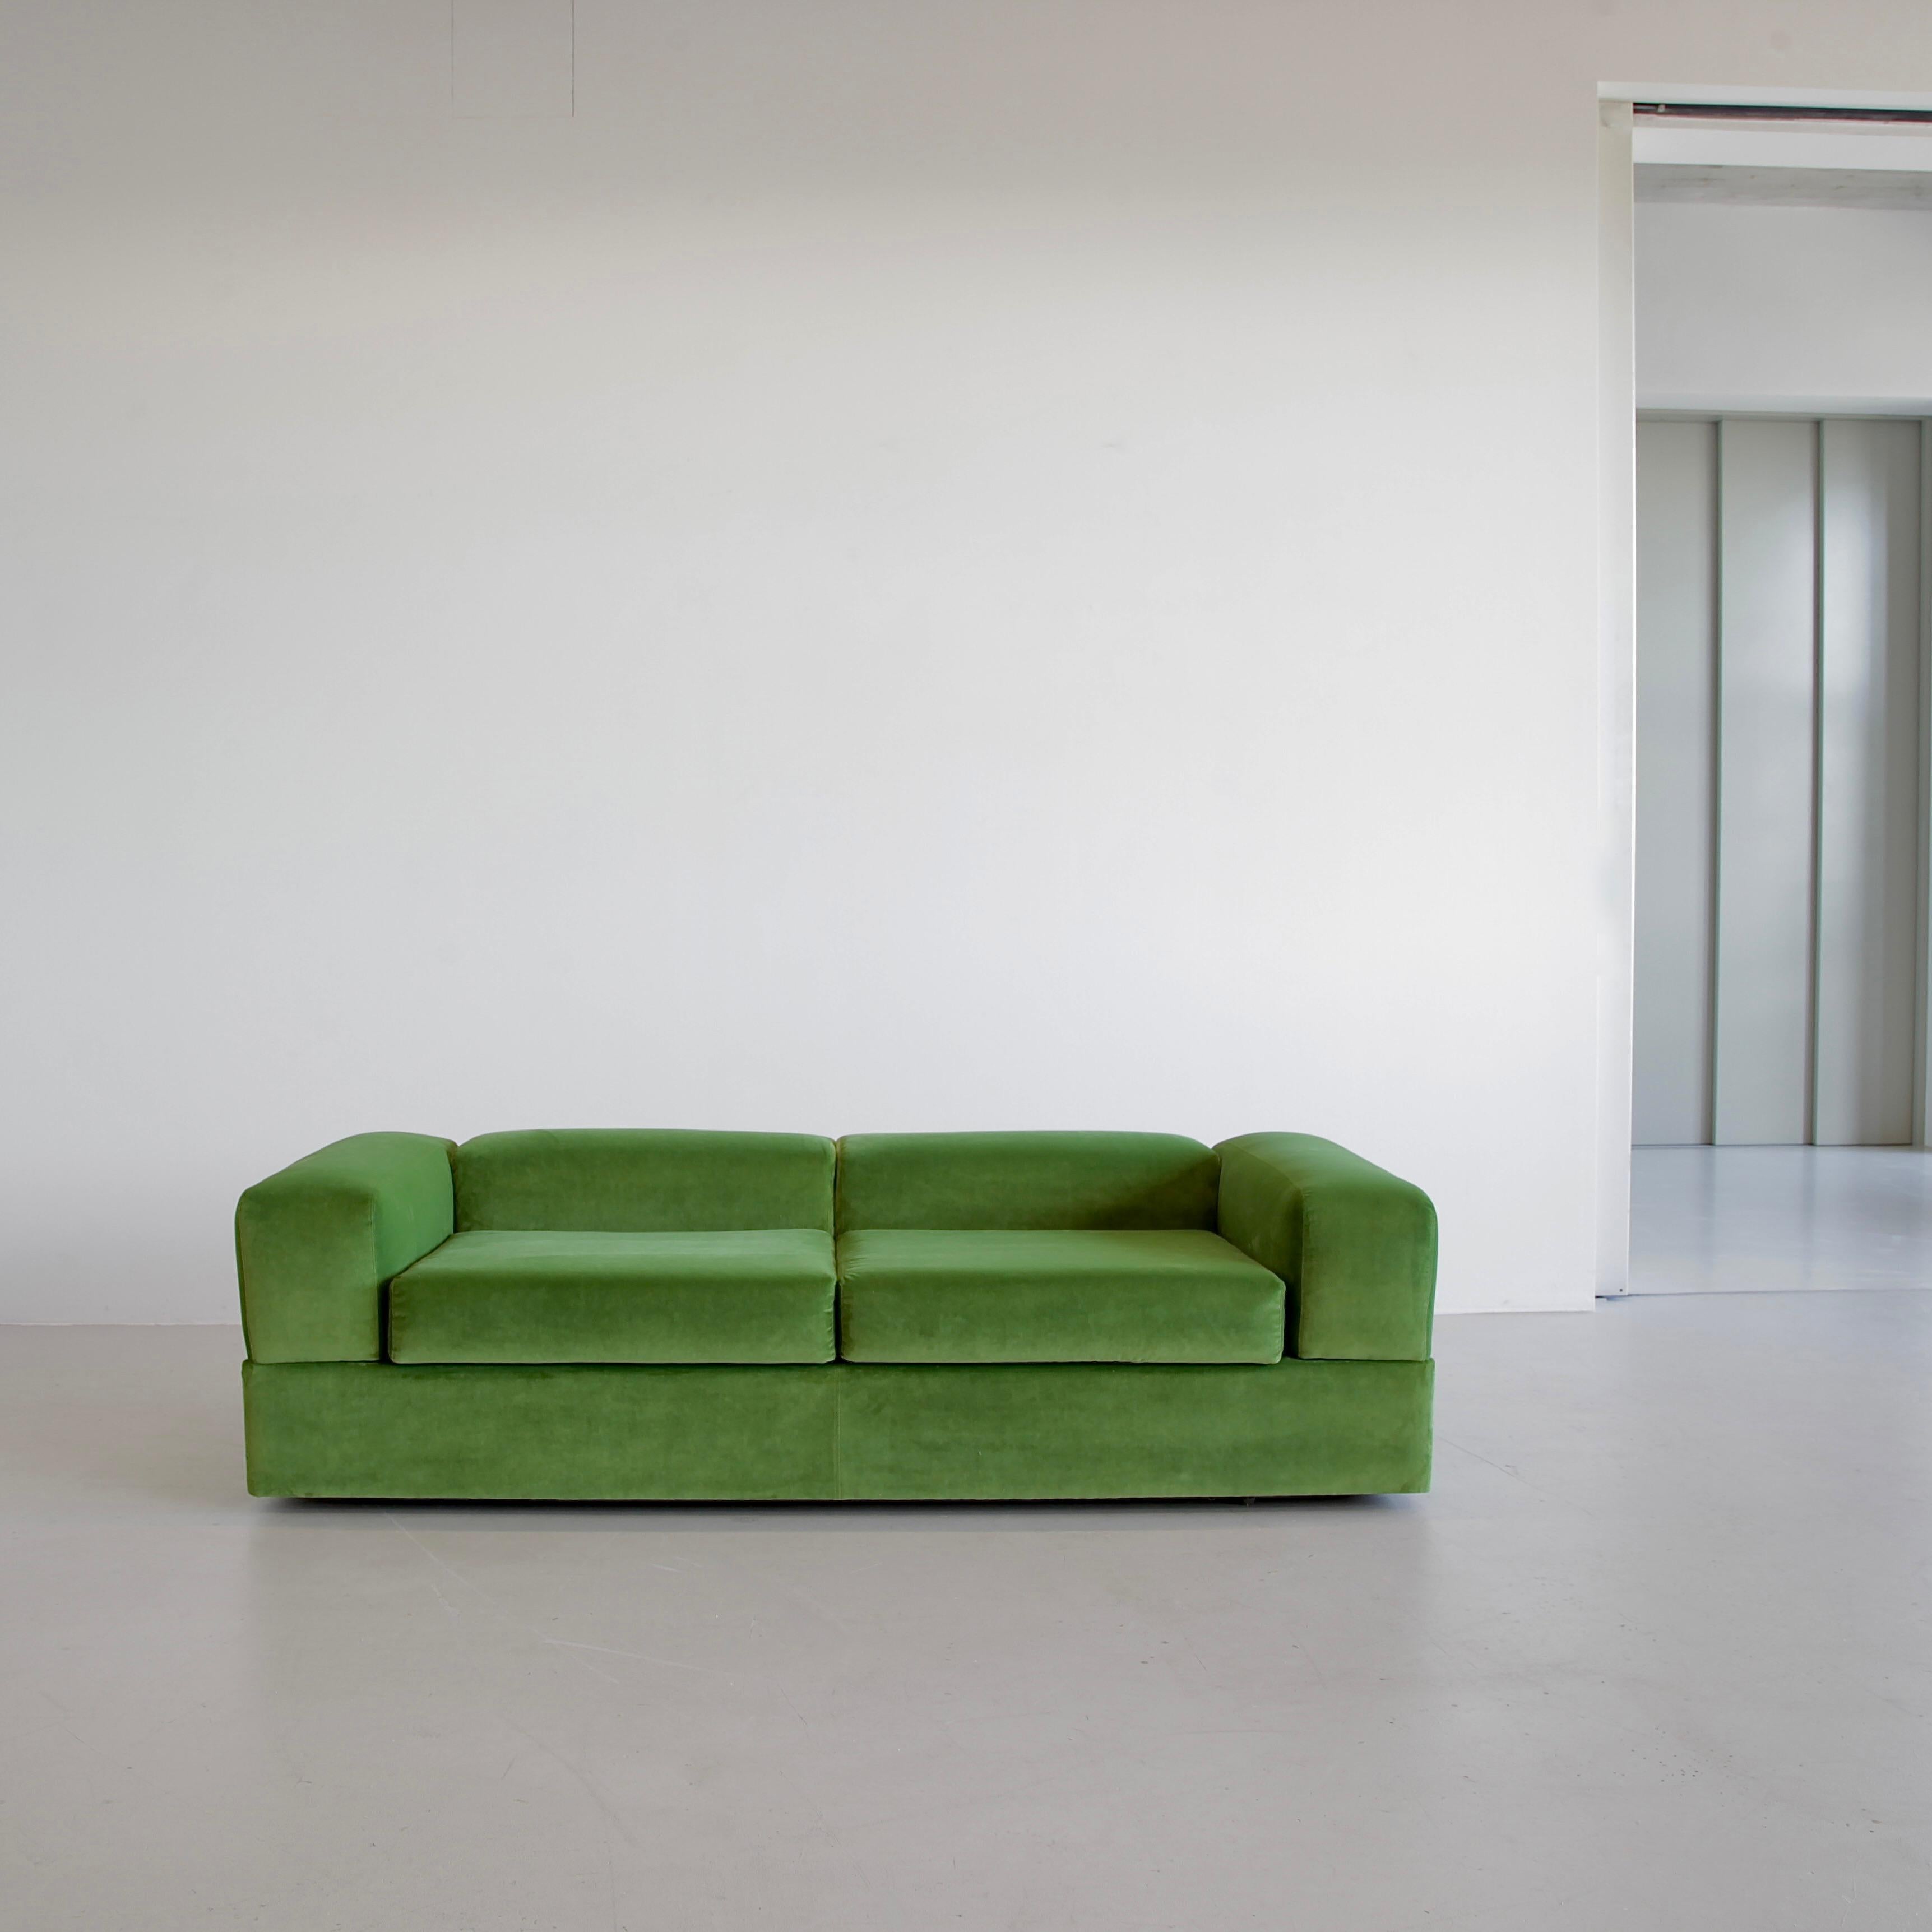 Sofa with wooden structure and metal spring seat. The mattress is covered with canvas, the sofa has been refurbished and re-upholstered in green English velvet. The armrests and backrest can be folded over to make space for the daybed, additionally,